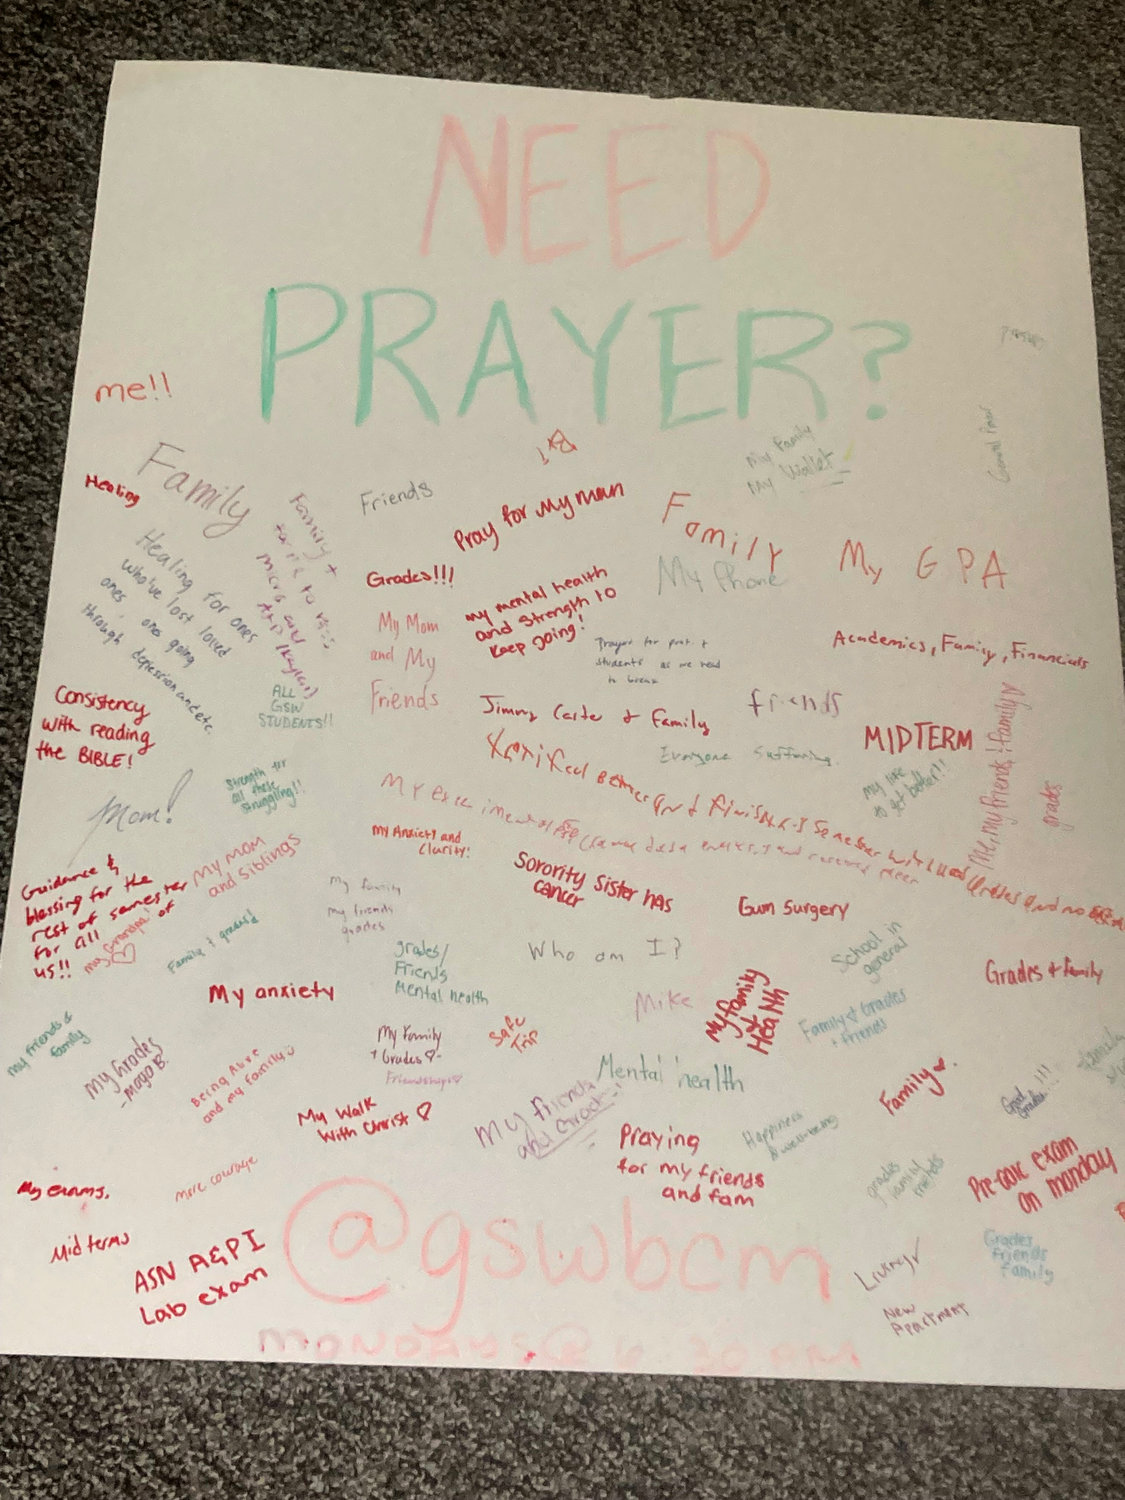 Students at Georgia Southwestern State University in Americus, Ga., wrote down prayer requests for the Collegiate Day of Prayer Event.